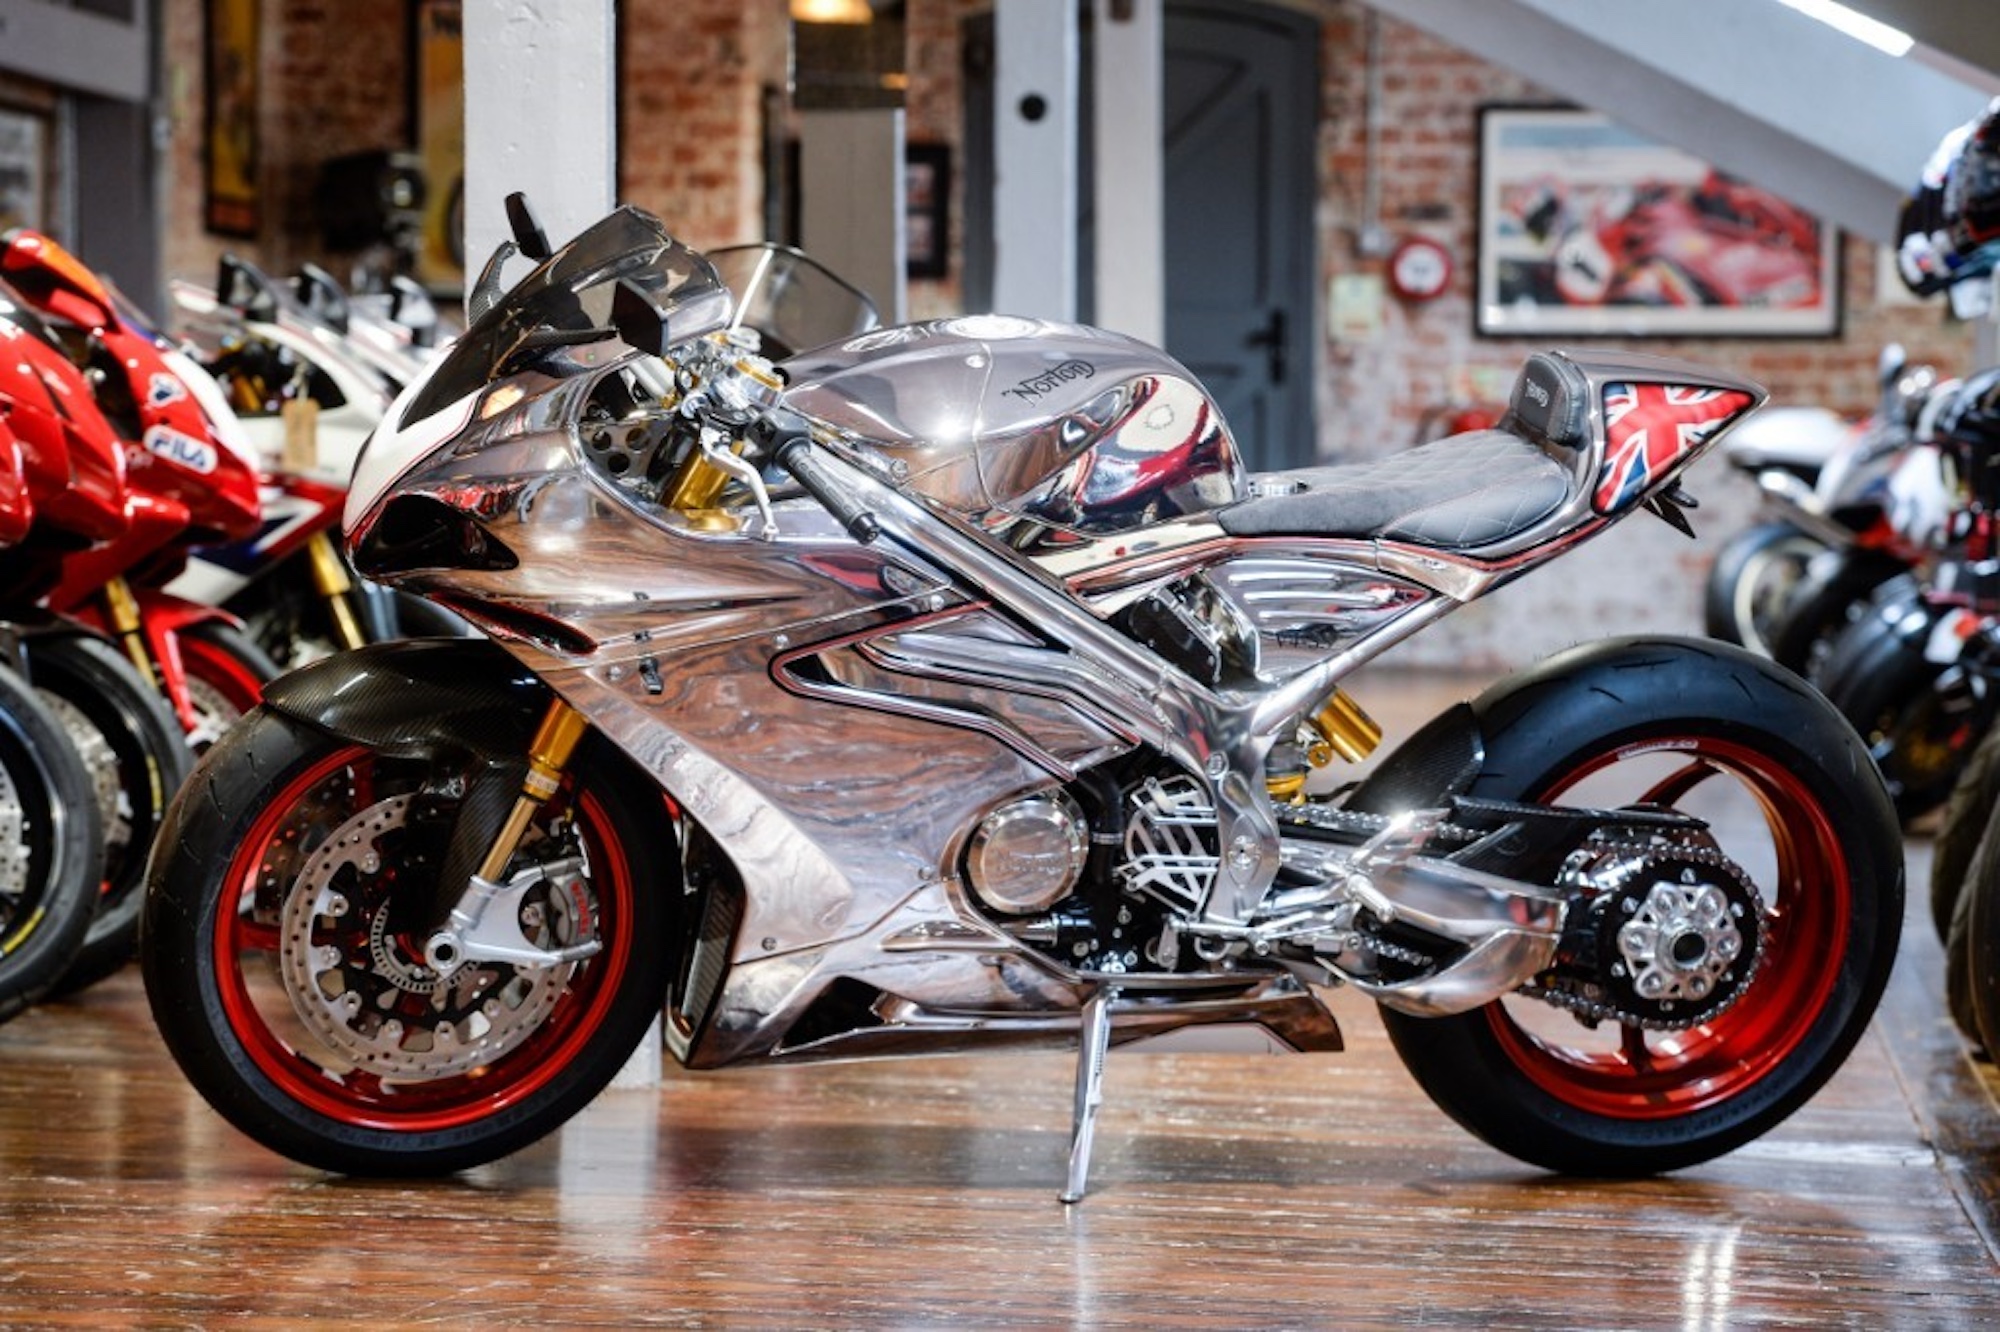 A side view of a chromed motorcycle.